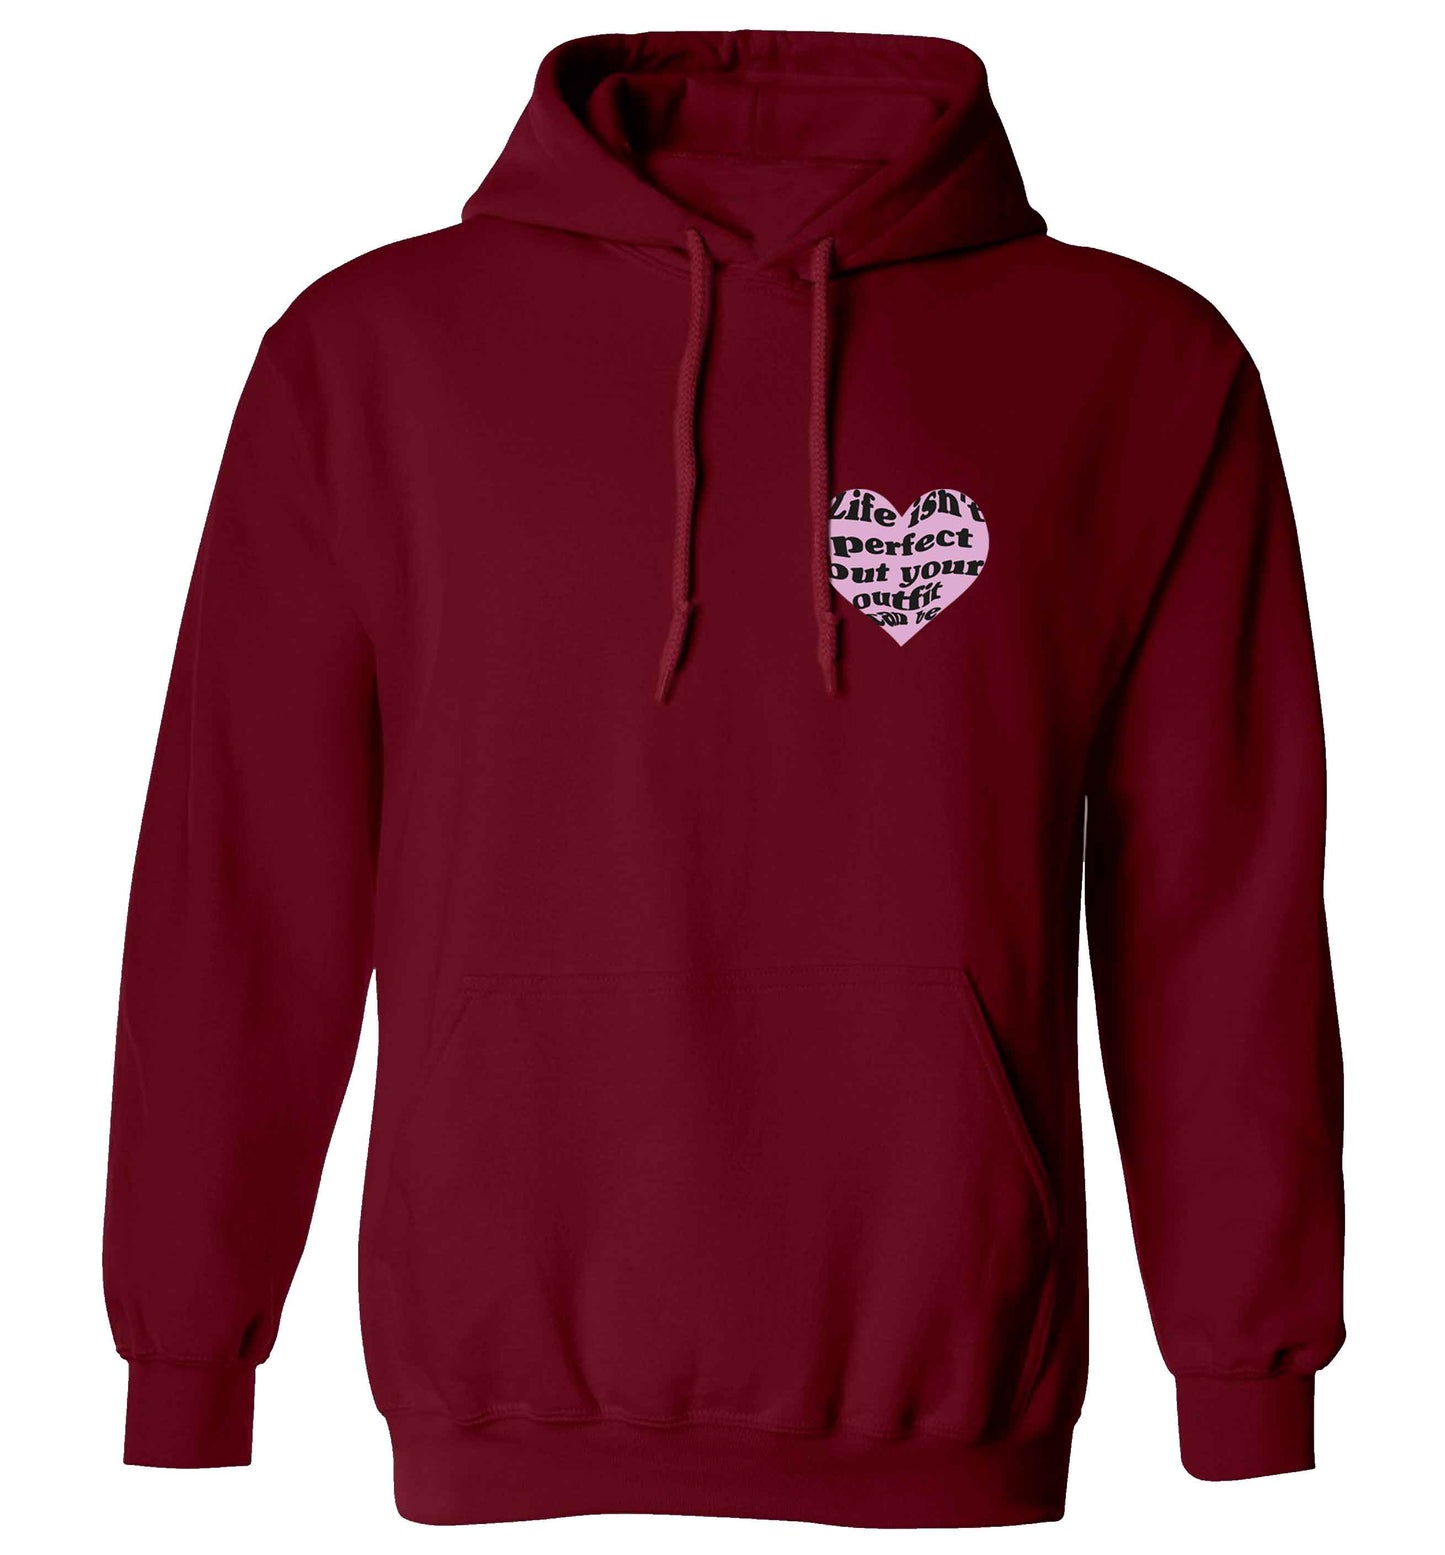 Life isn't perfect but your outfit can be adults unisex maroon hoodie 2XL